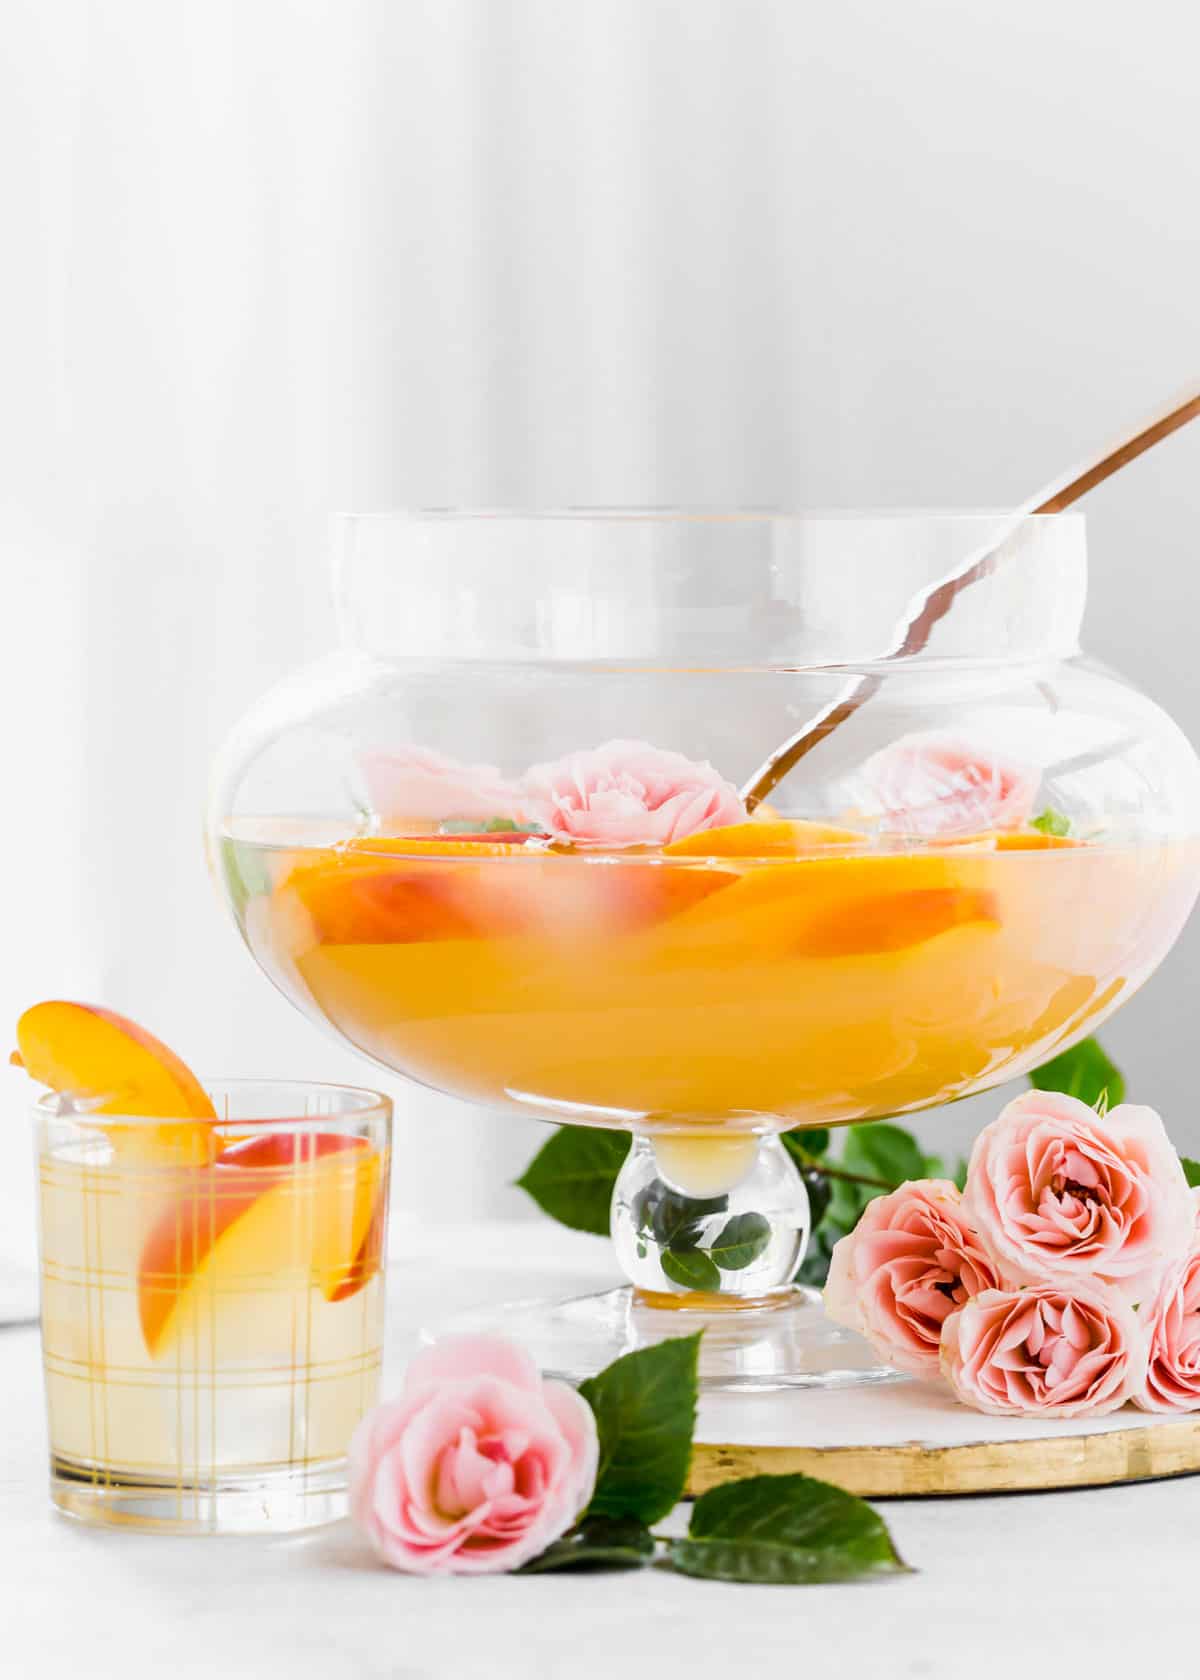 peach colored punch in glass footed bowl with ladle, and filled glass on table.